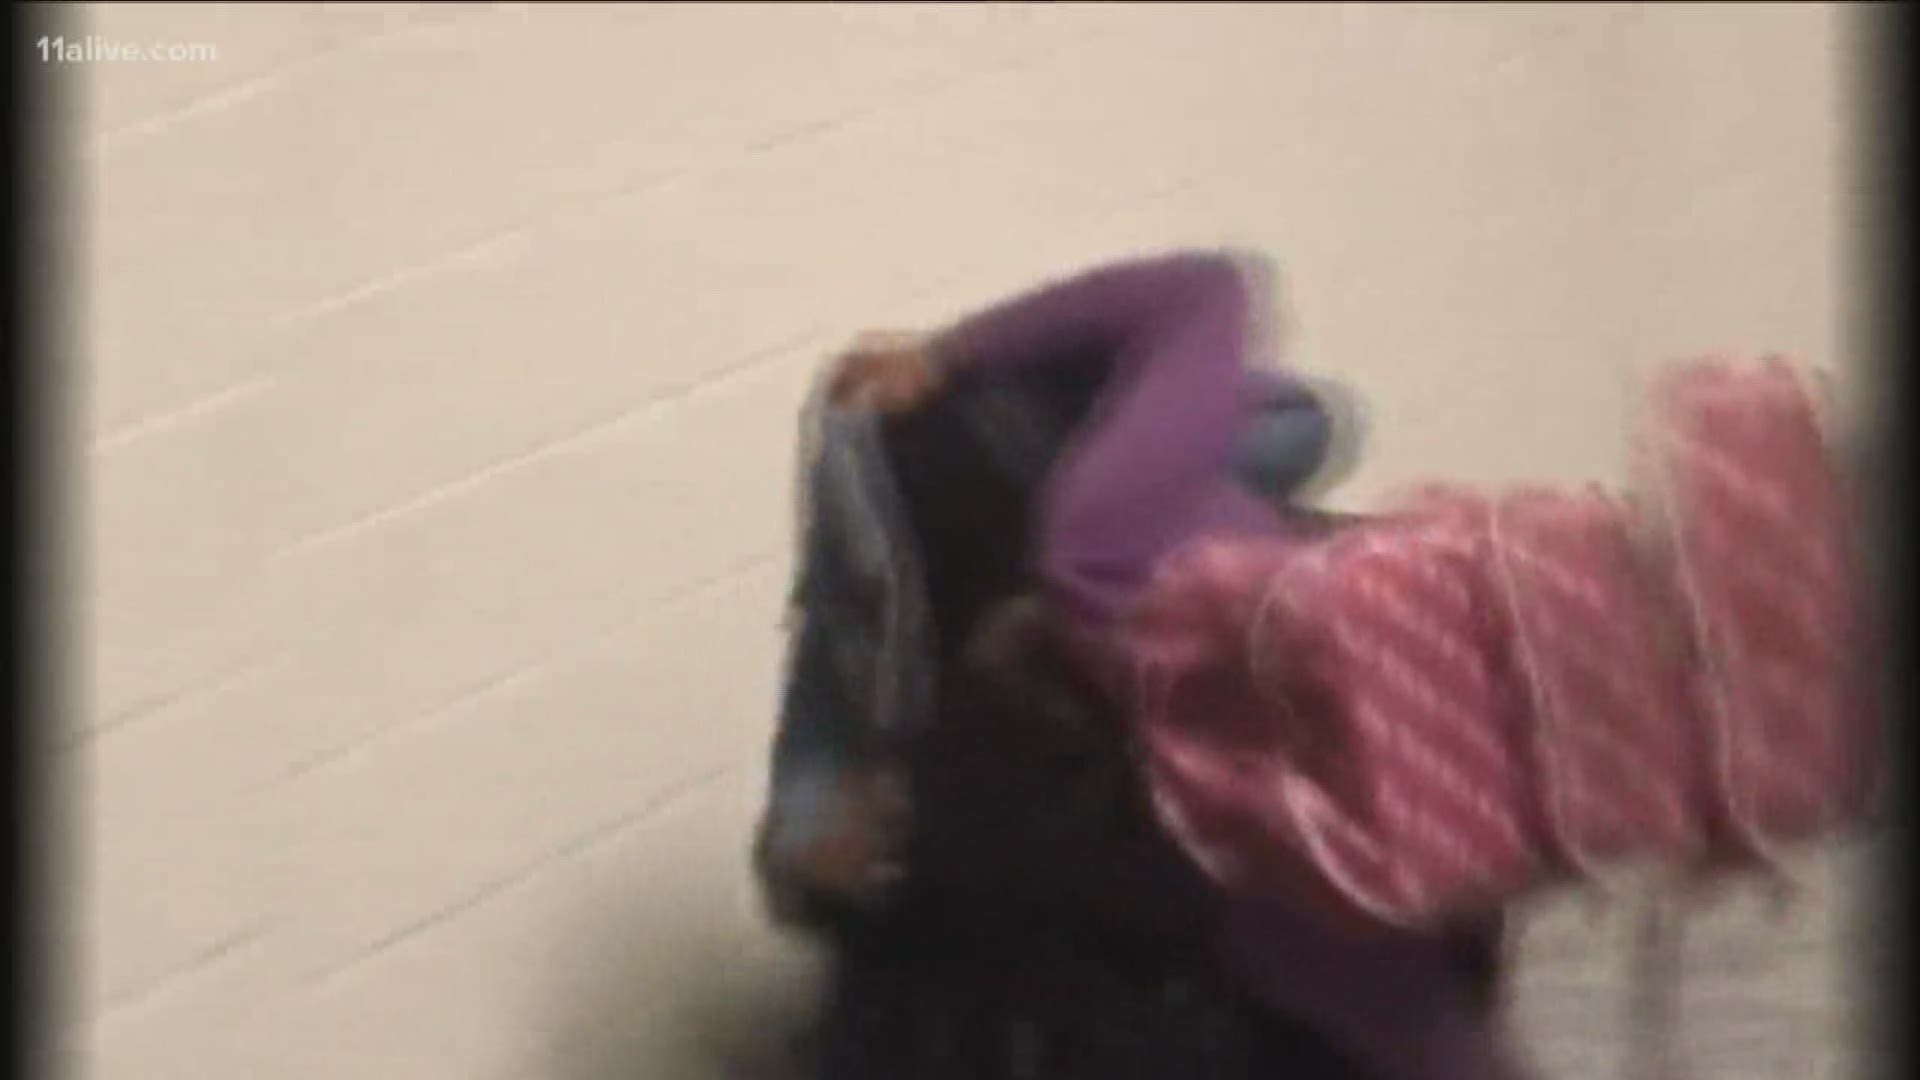 A mother claims a fight happened at a Dekalb County school involving two adults and her twin daughters.